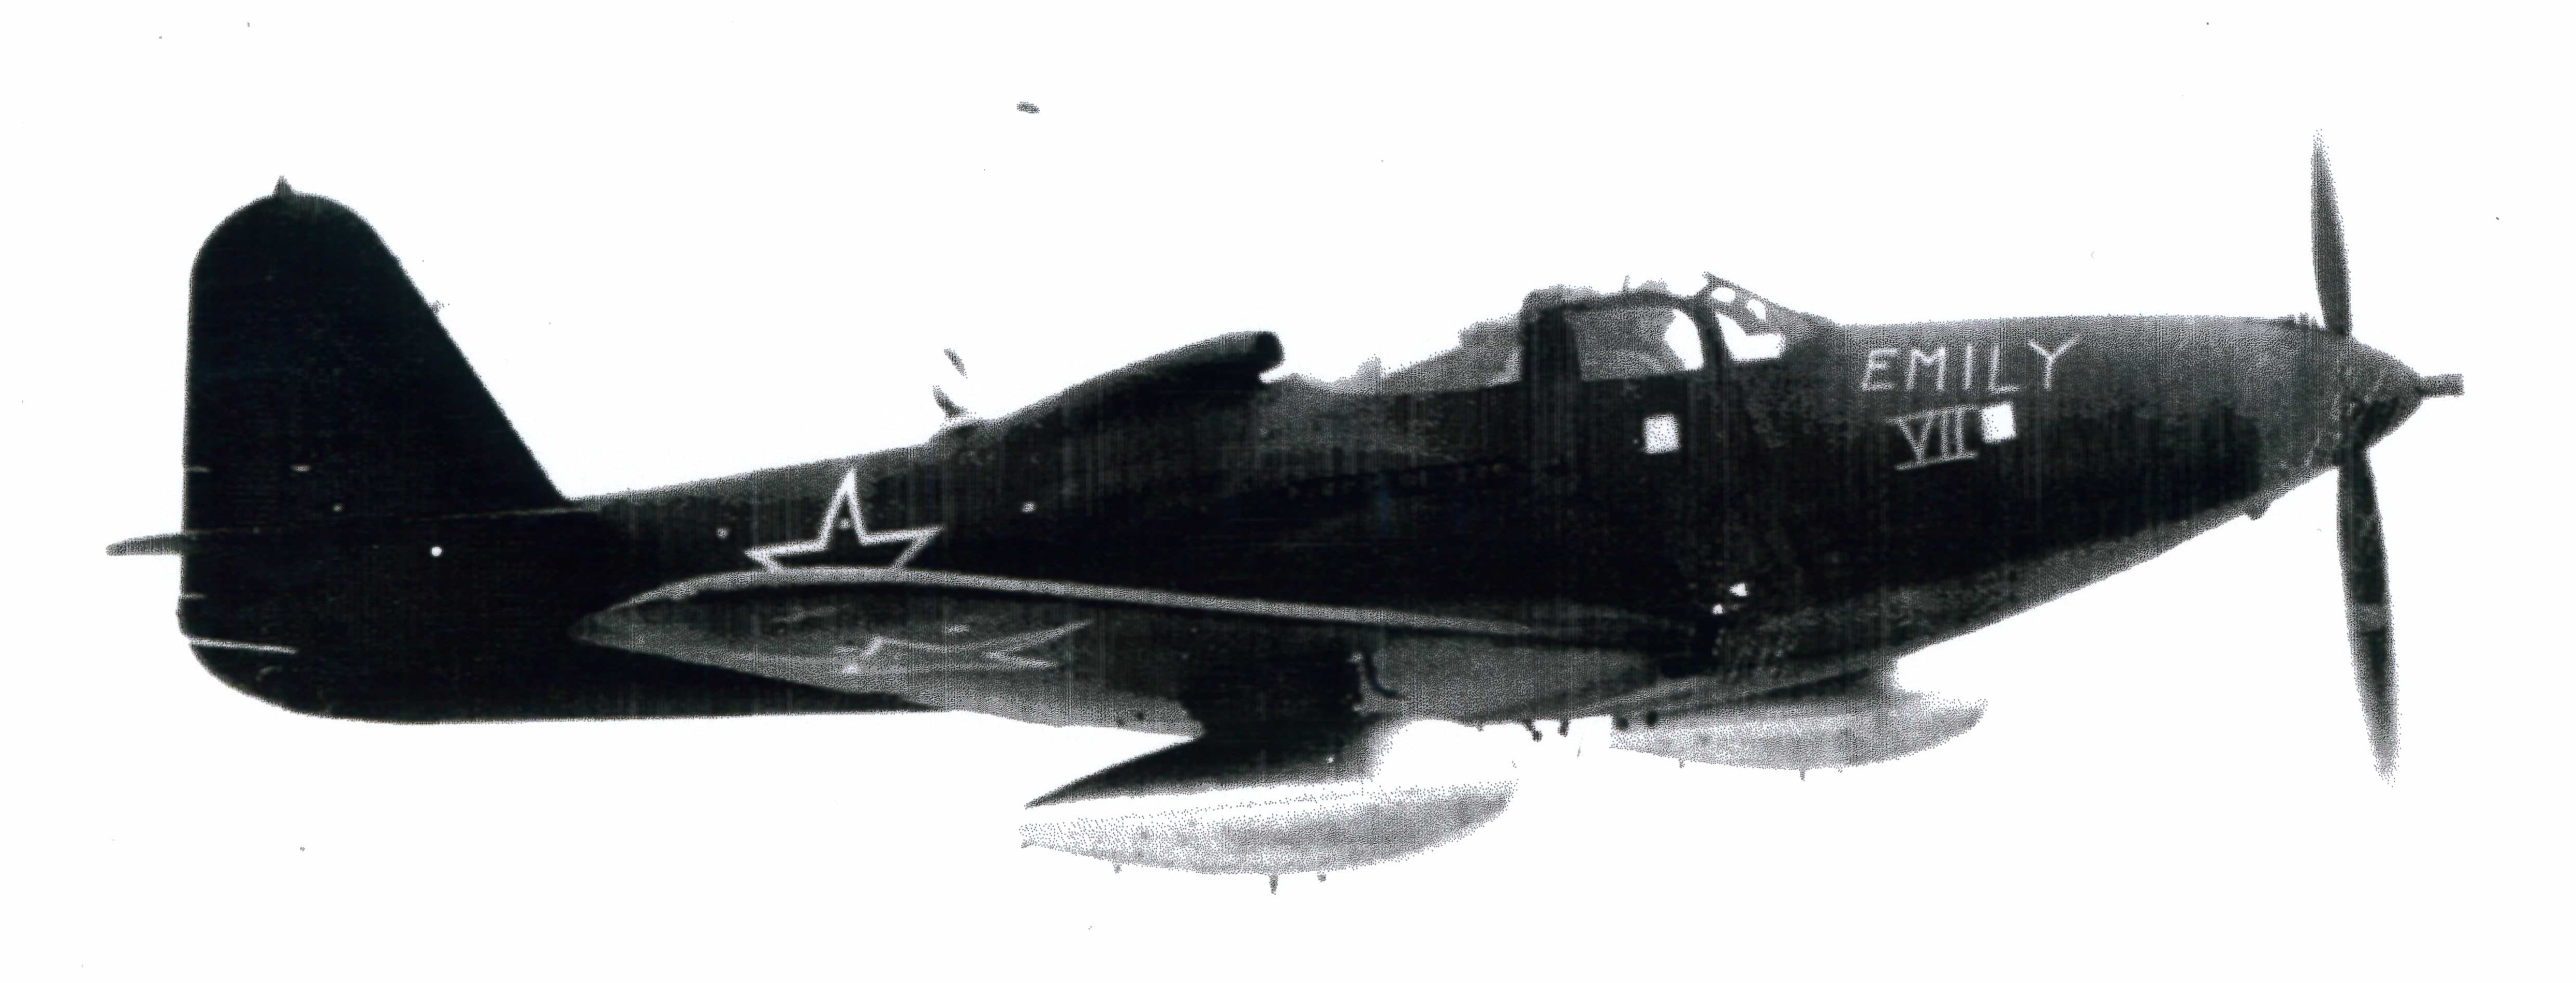 Parke Cox</a> flying his P-63 airplane, 'Emily VII'